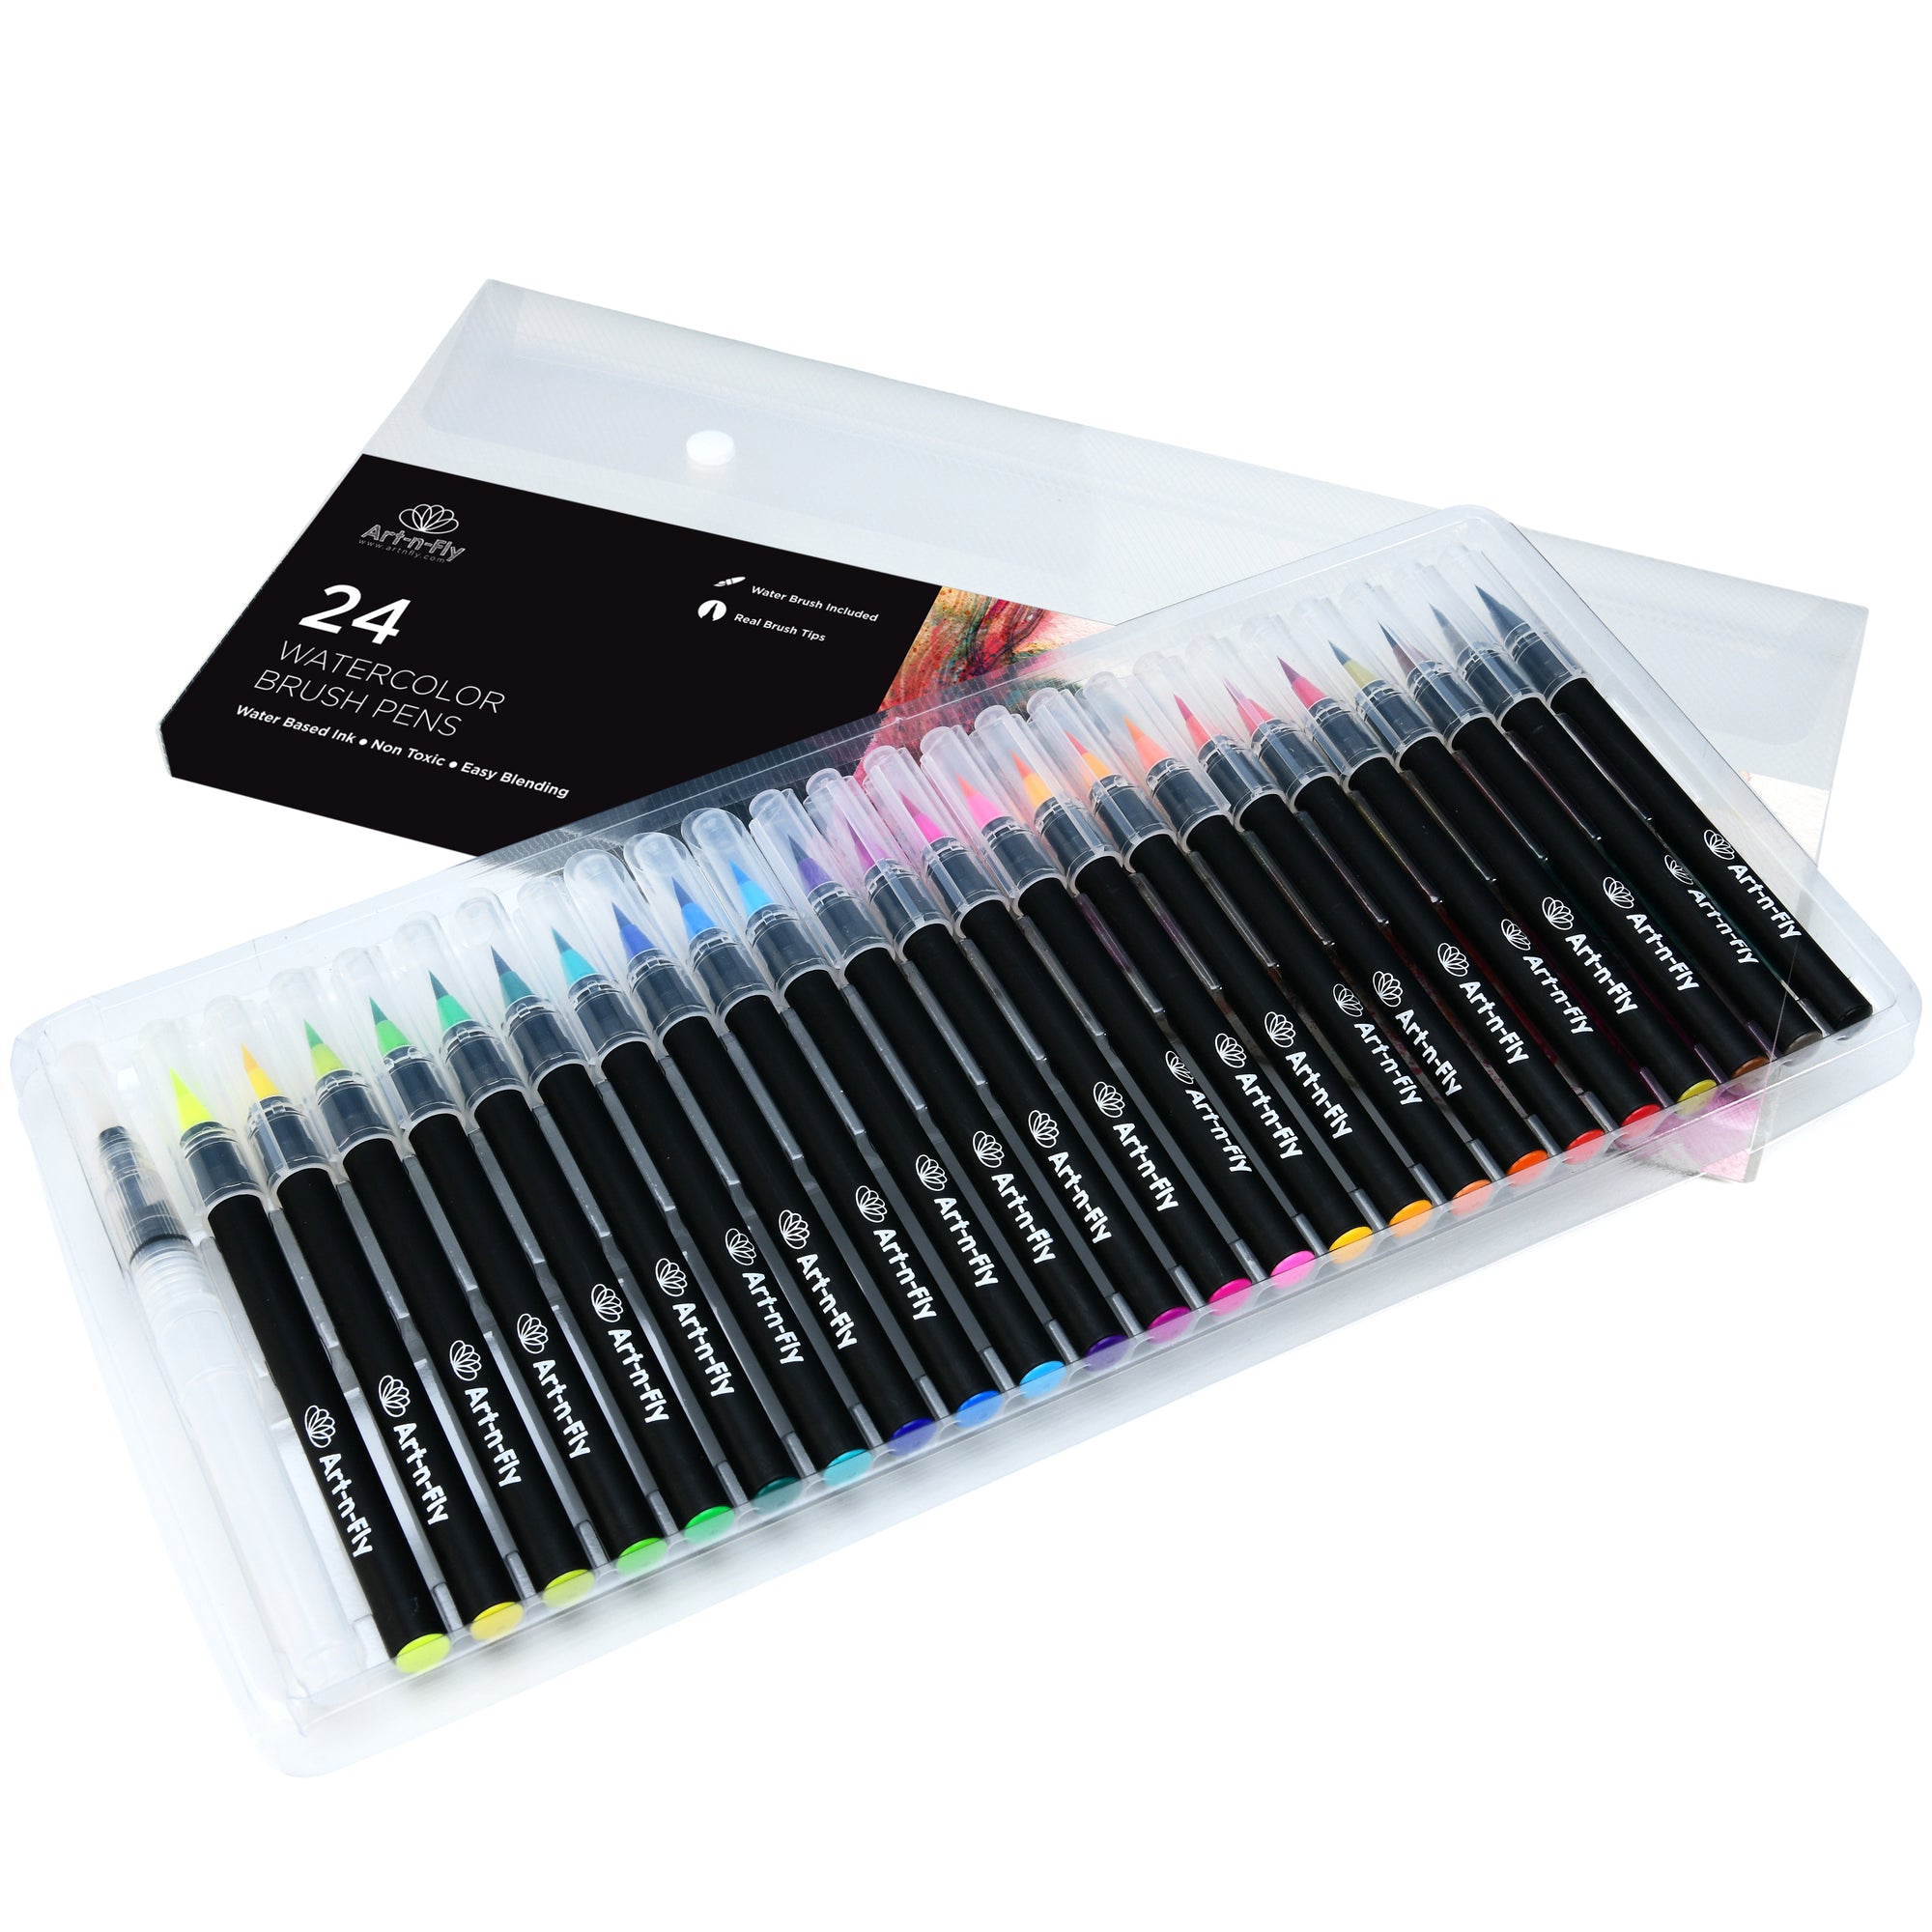 Watercolor Brush Pens – Includes 24 Colorful Watercolor Markers (Flexible  Nylon Brush Tips) With 1 Refillable Water Blending Brush | Watercolor Paint